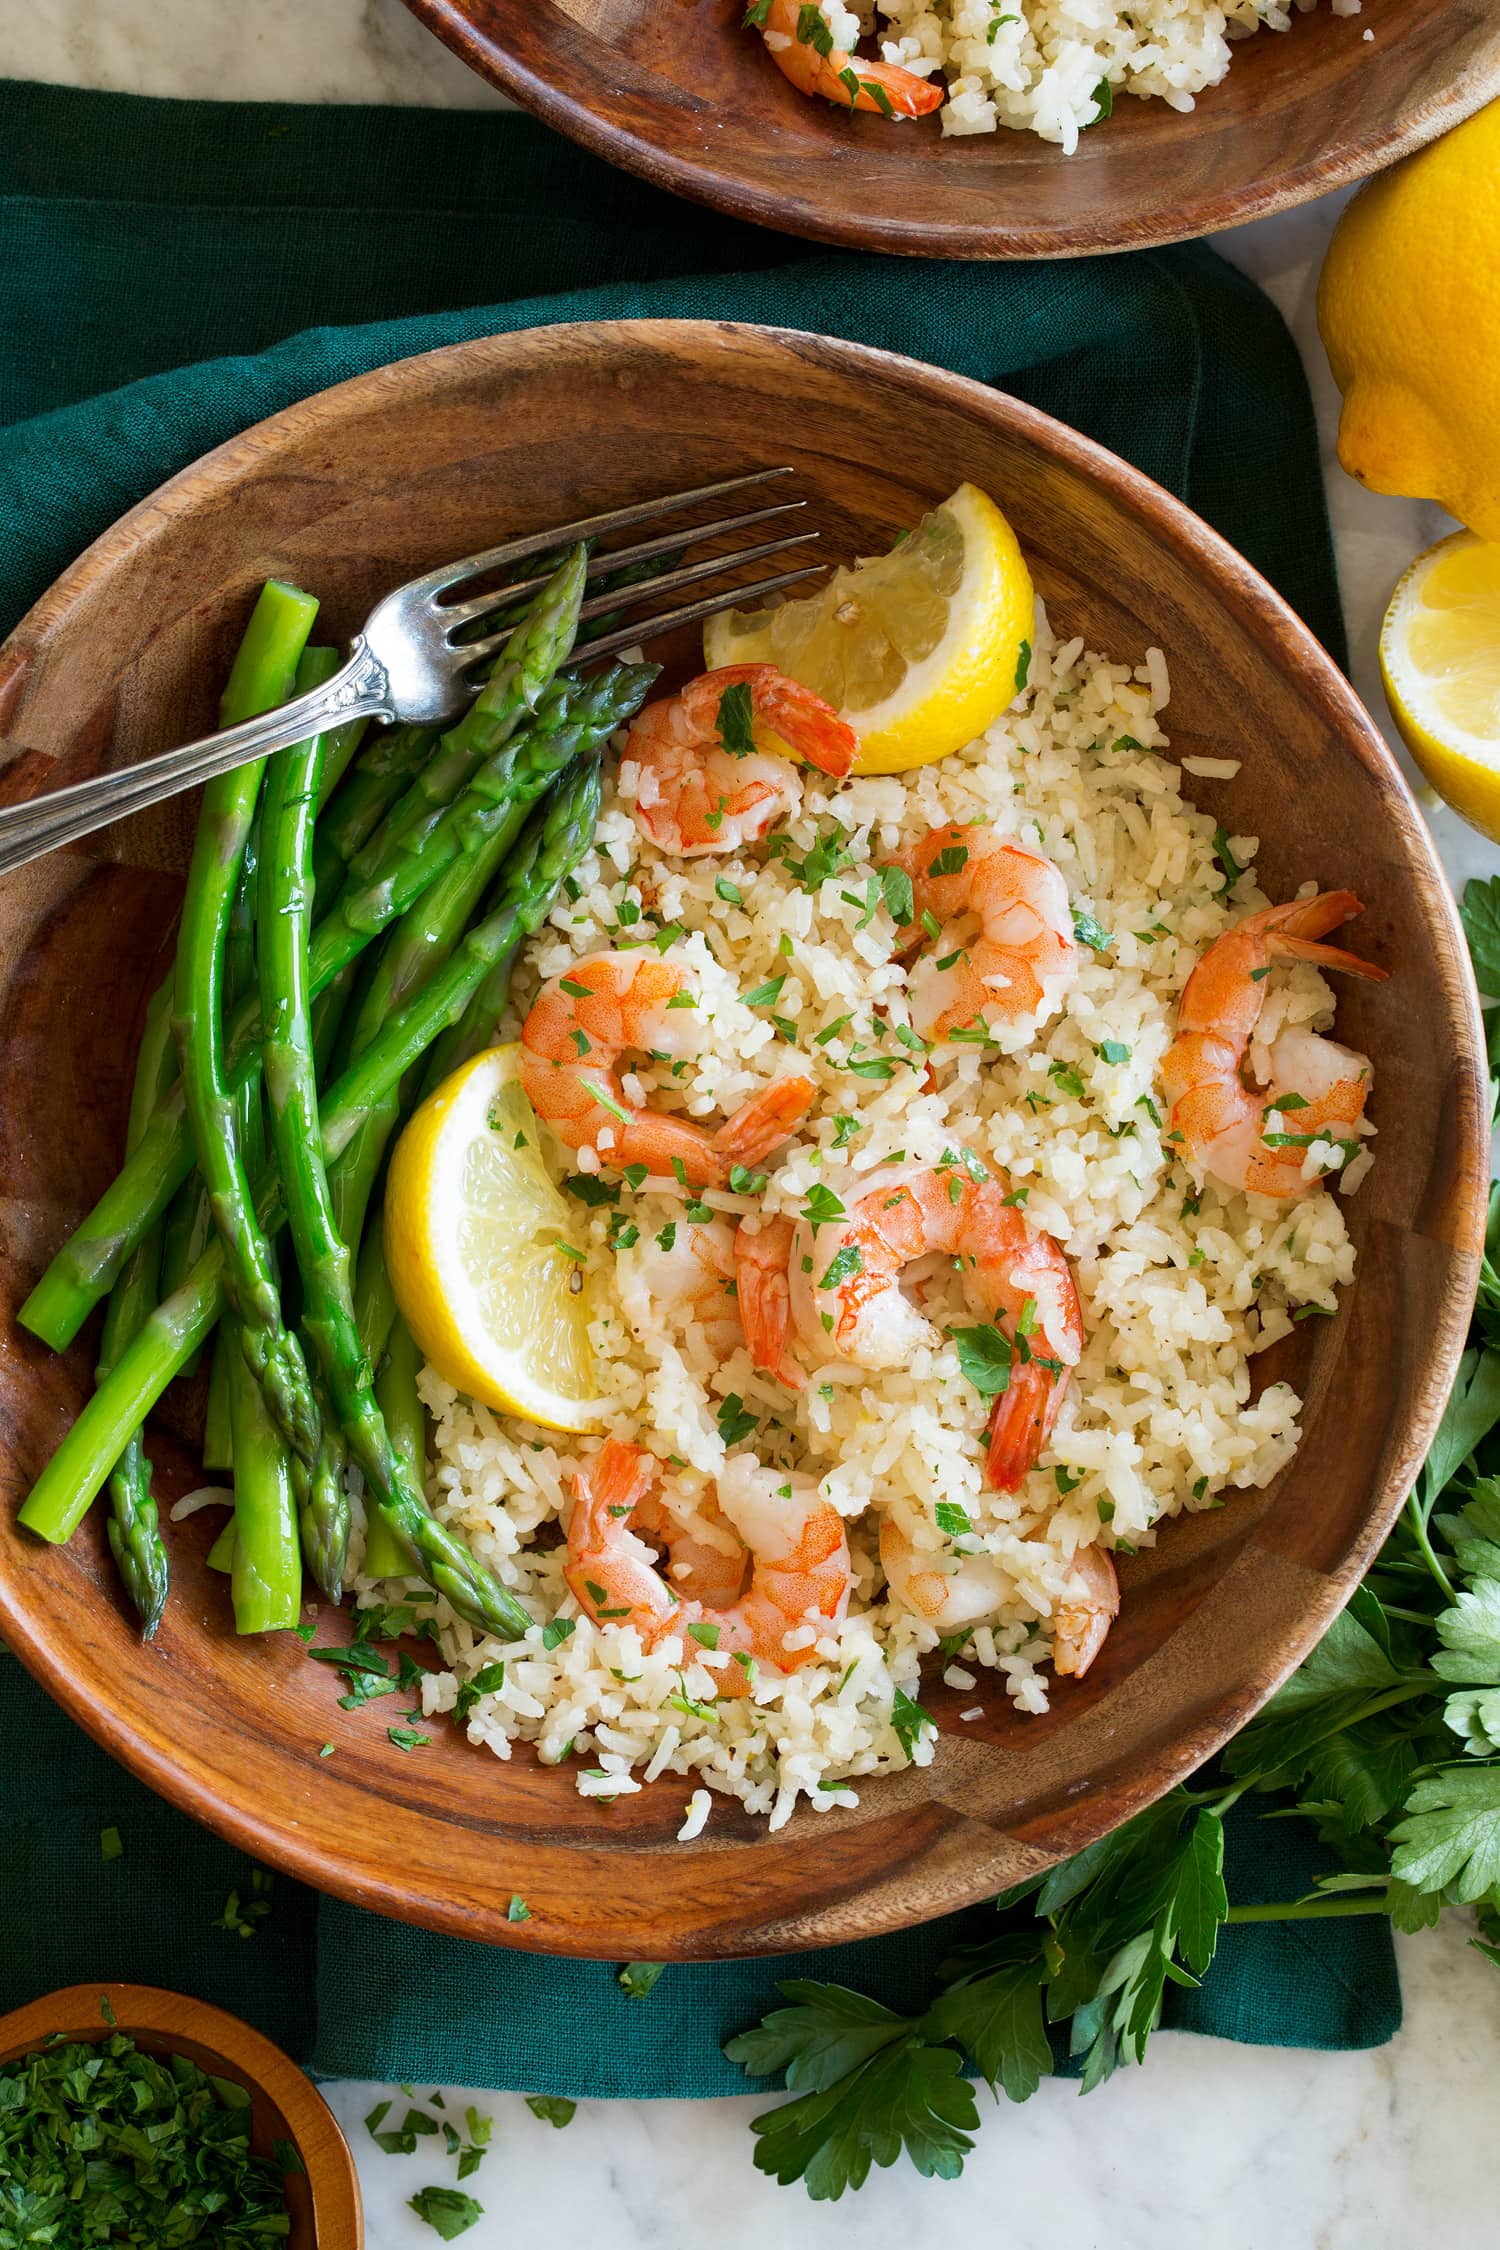 Rice, shrimp and asparagus in a wooden bowl with lemon slices.